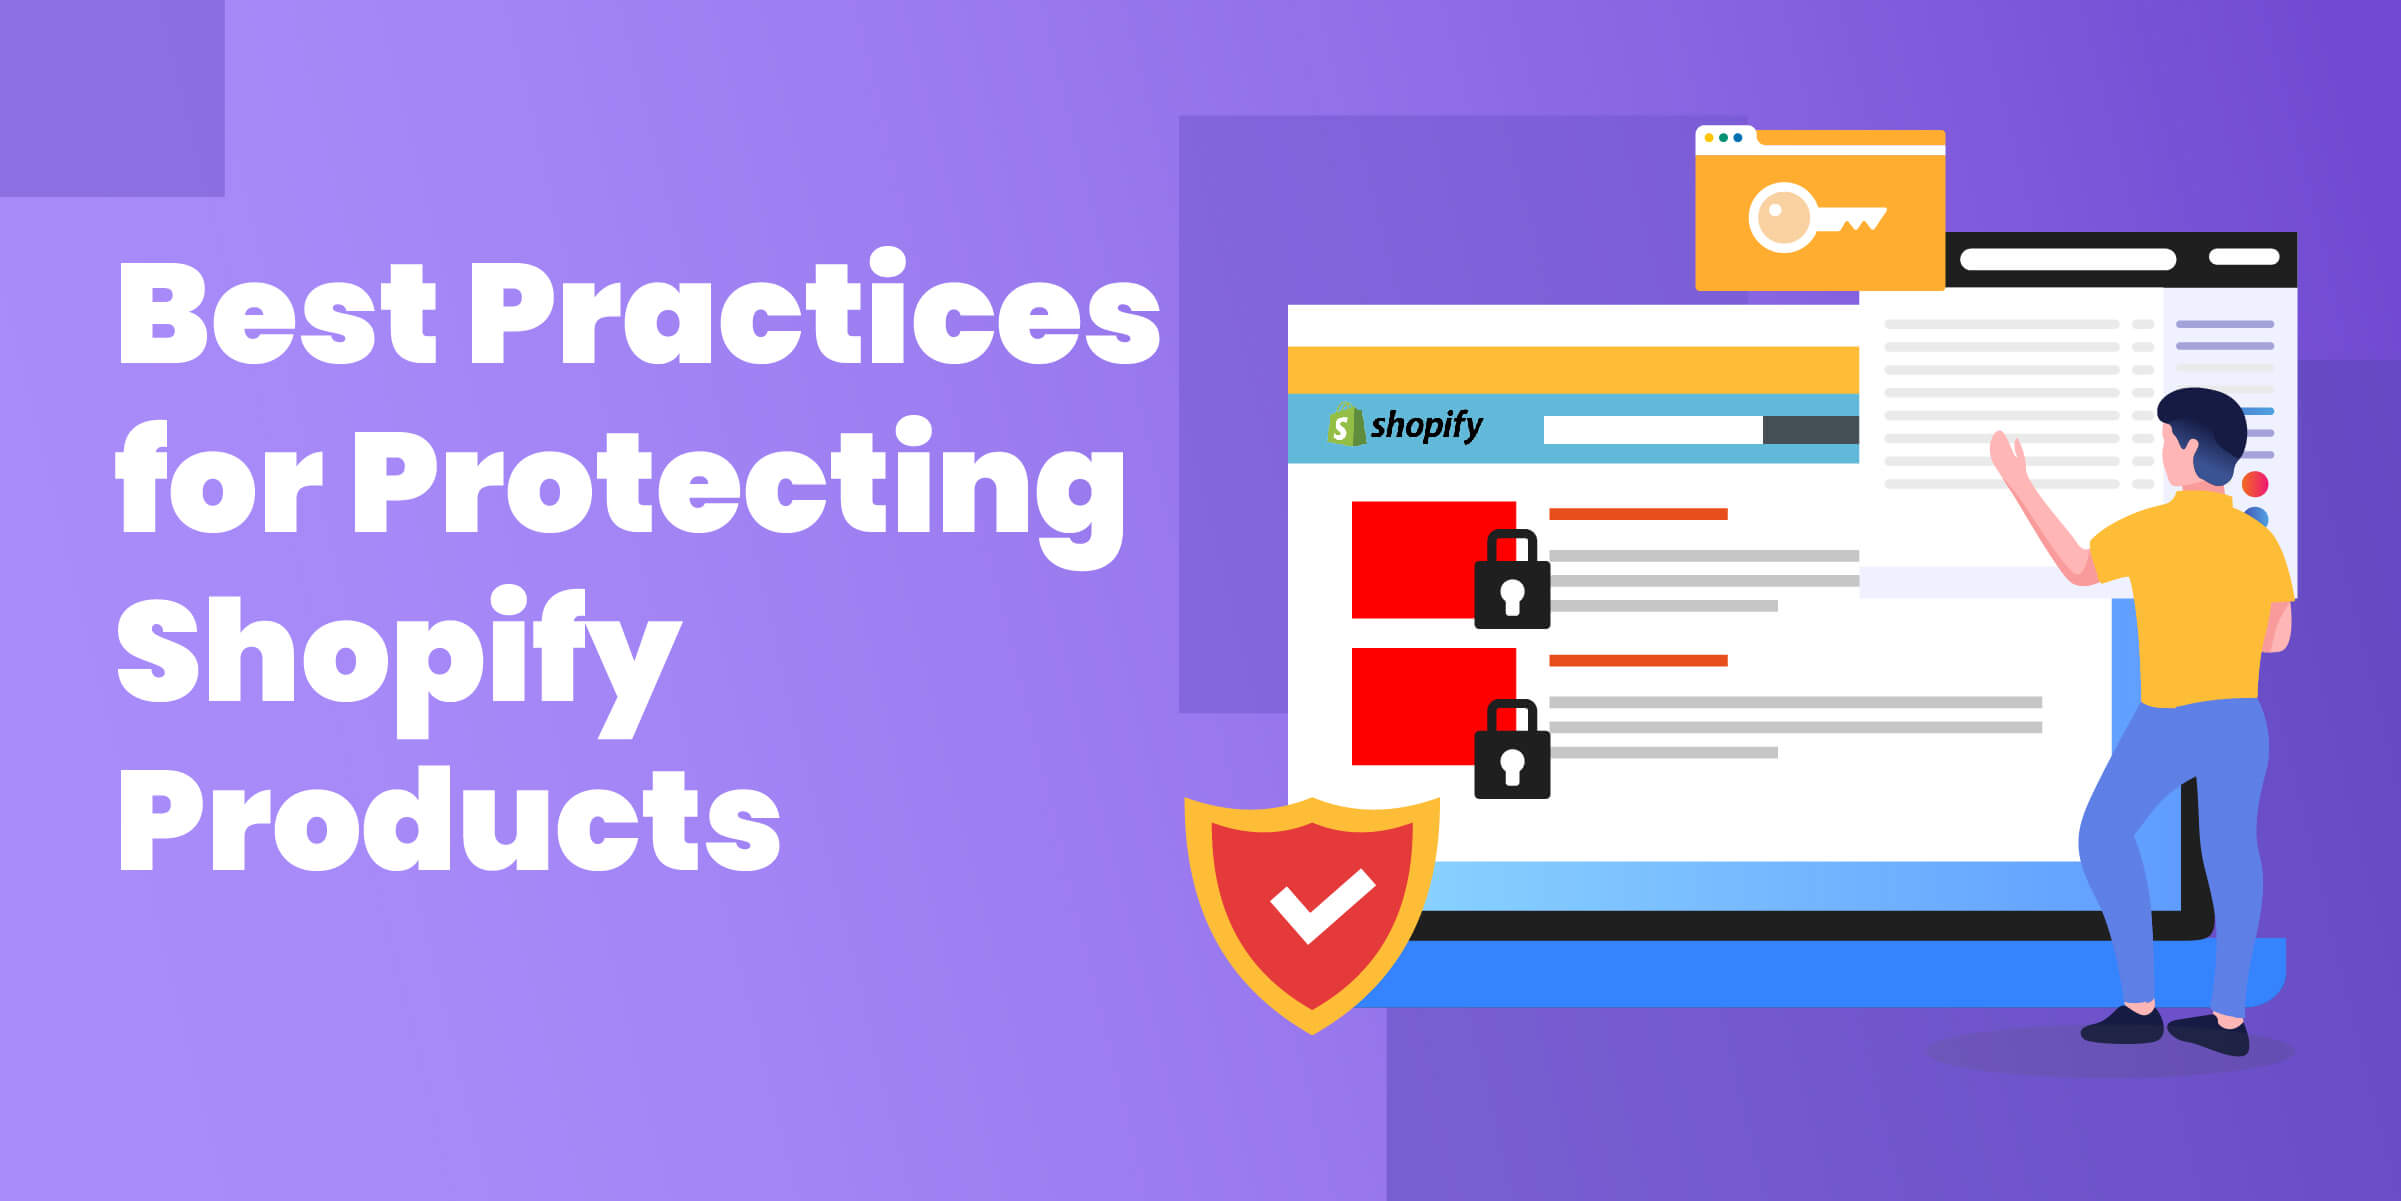 Best Practices for Protecting Shopify Products